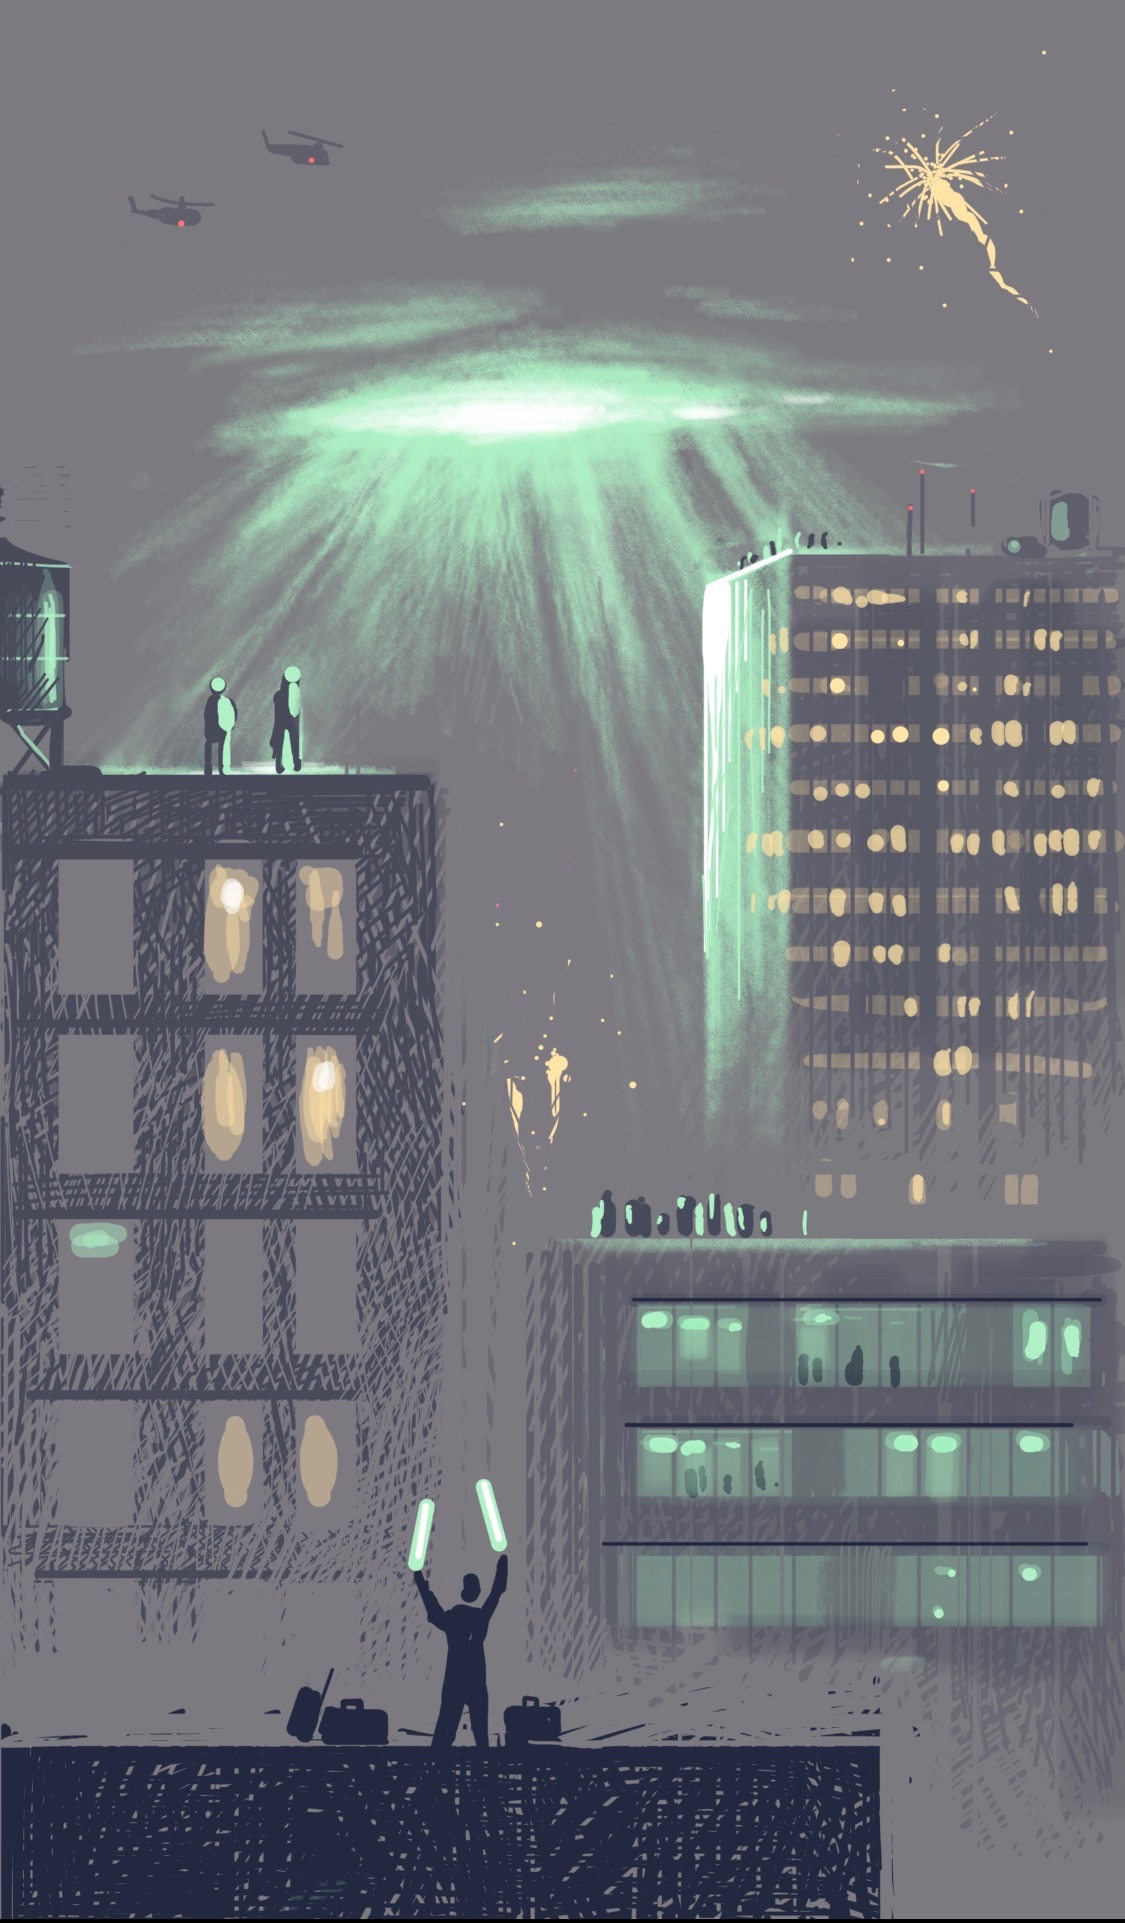 An unearthly glow hovers over a city celebrating New Year's Eve. On one building, a small figure standing next to some baggage signals what may be a descending spacecraft.